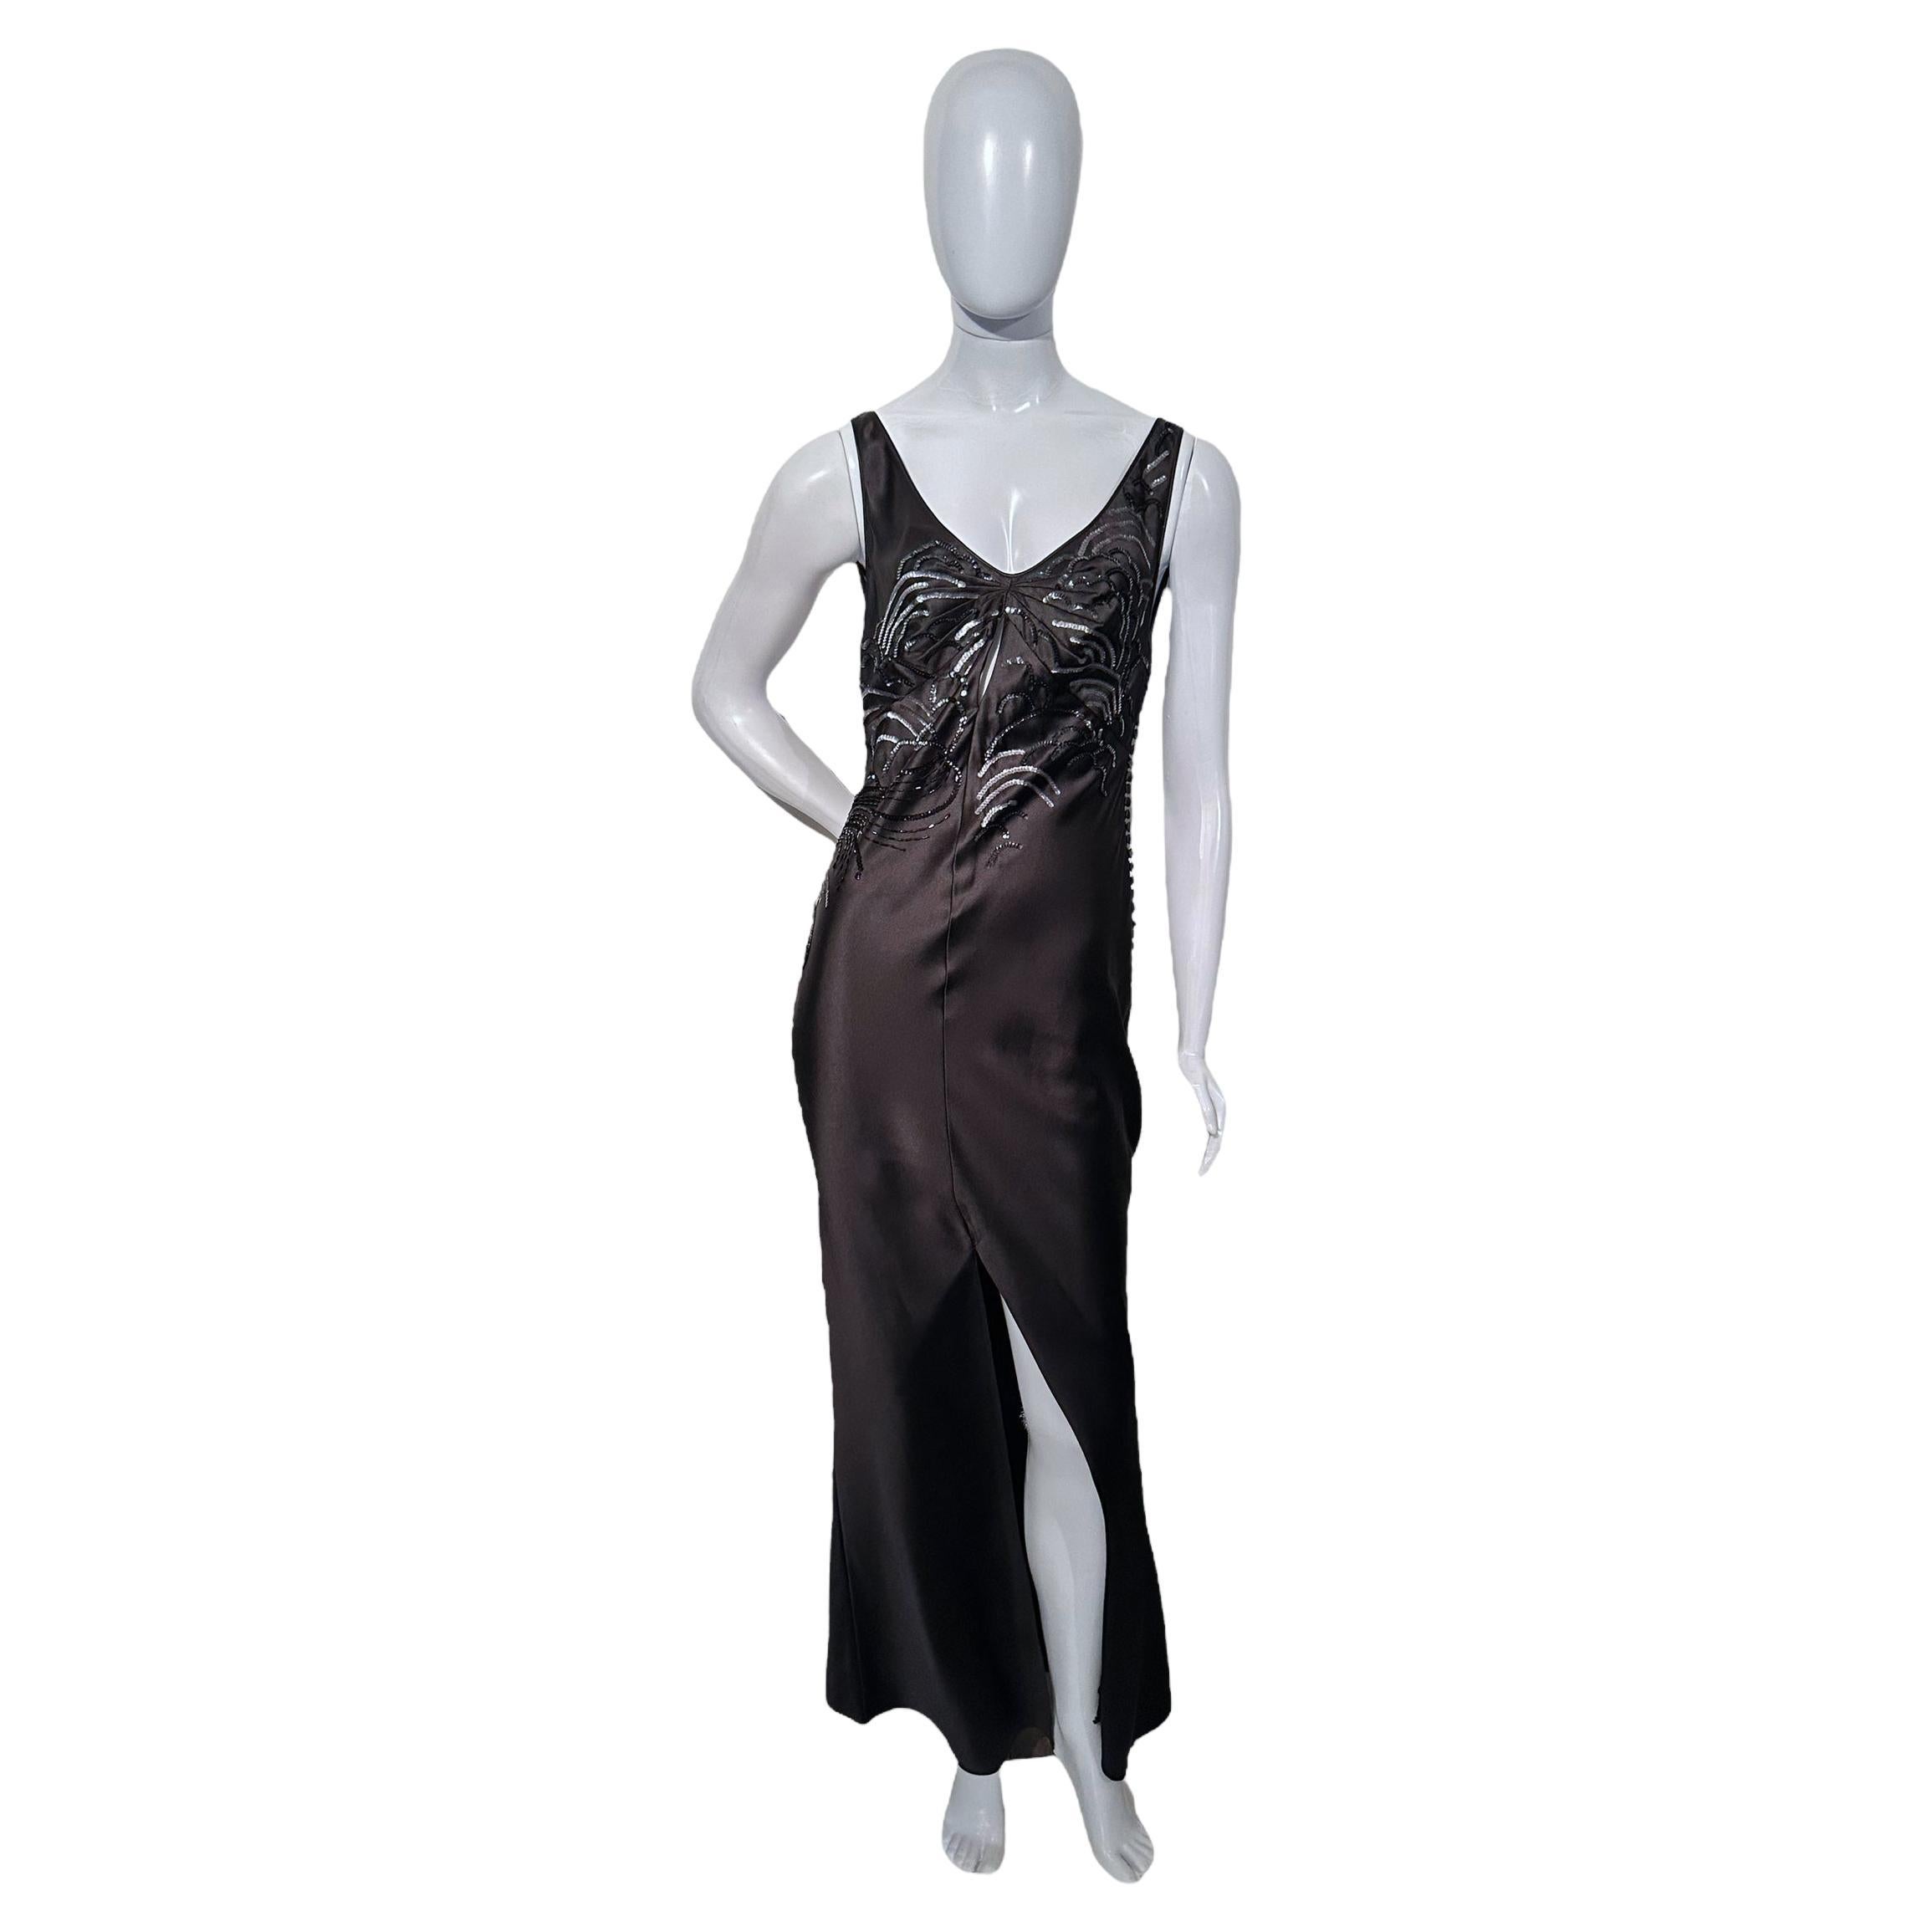 Iconic Christian Dior By John Galliano Ss 2005 Beaded Bodice Black Gown For Sale